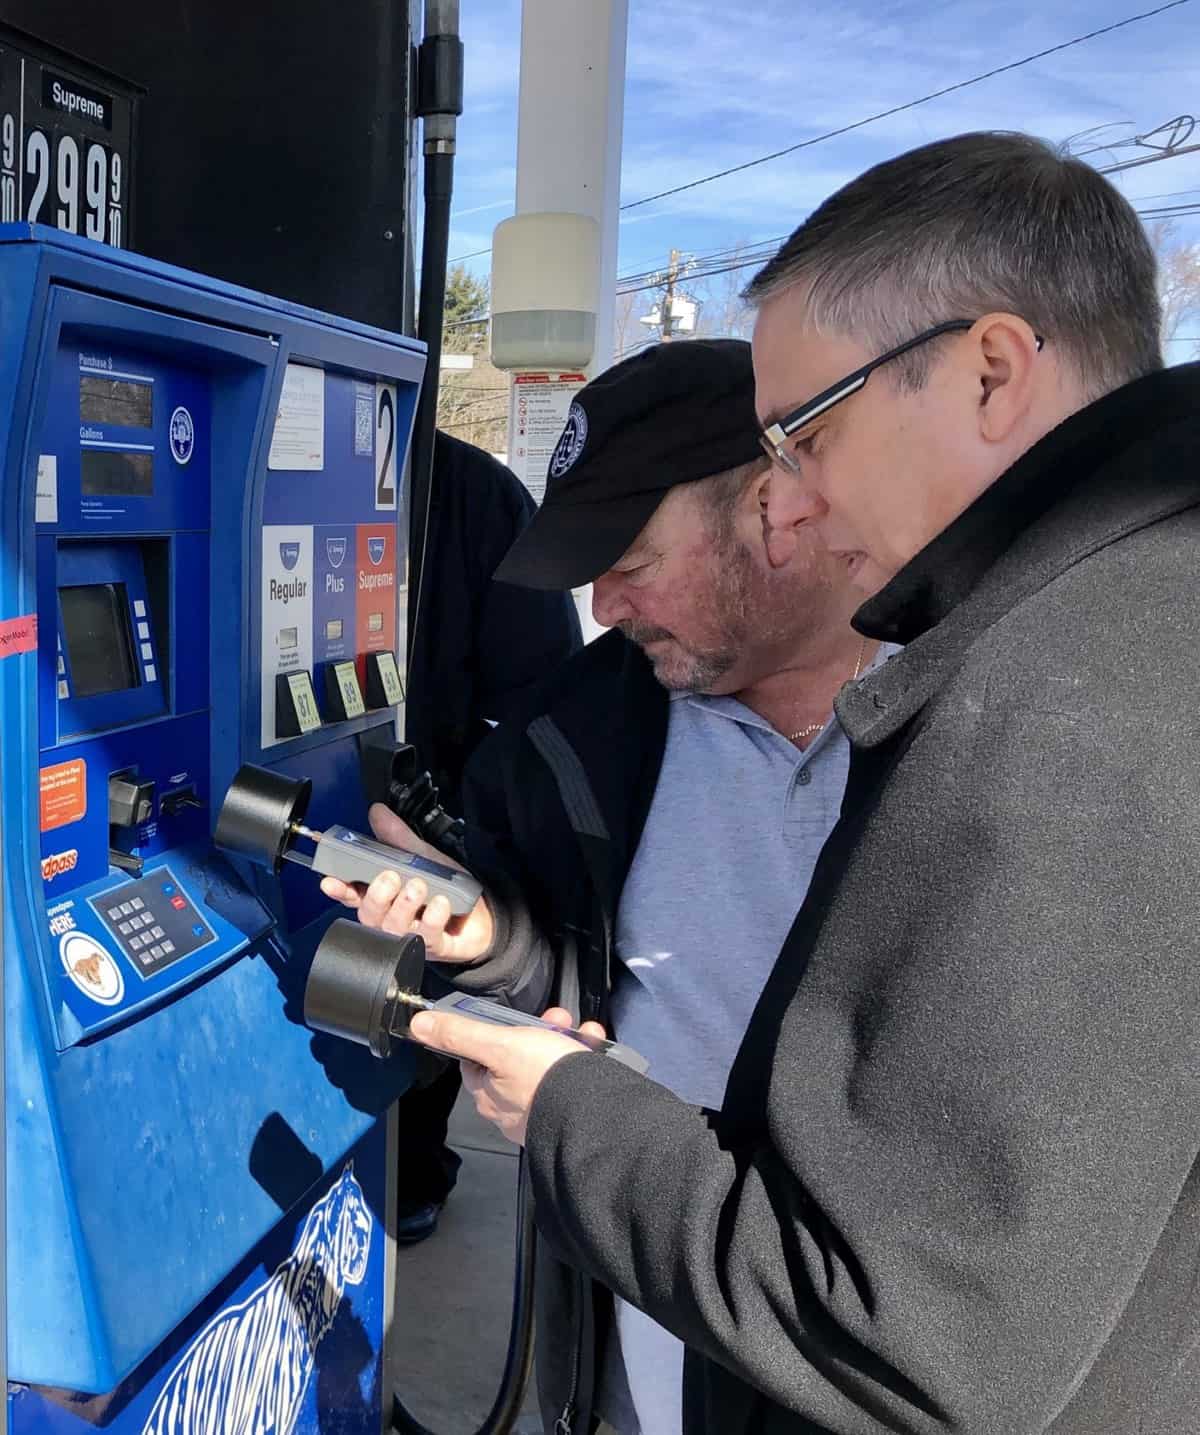 Mercer County purchases devices to detect credit card skimmers